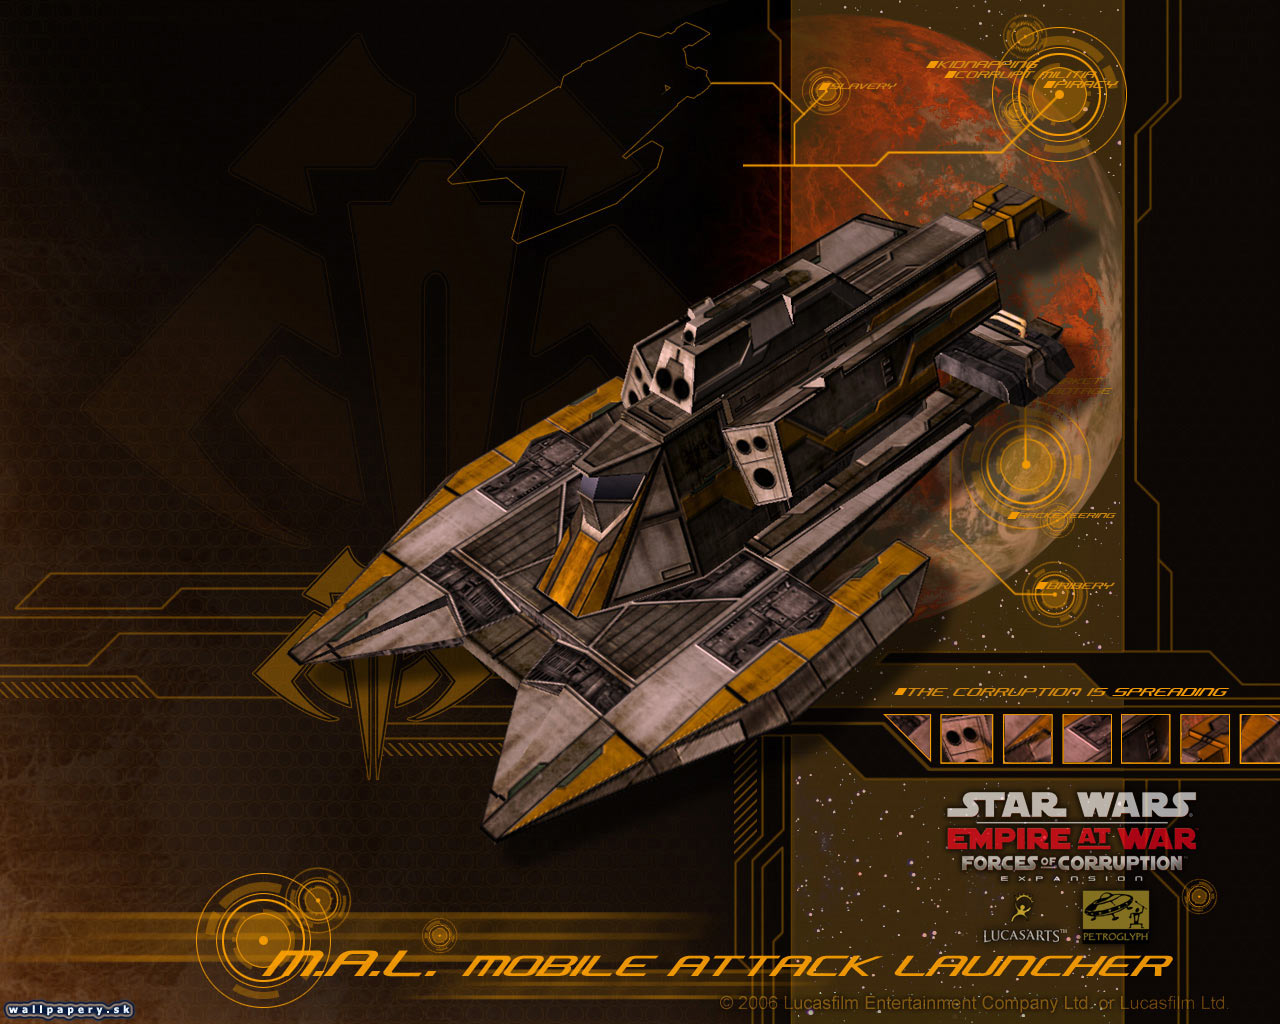 Star Wars: Empire At War - Forces of Corruption - wallpaper 10